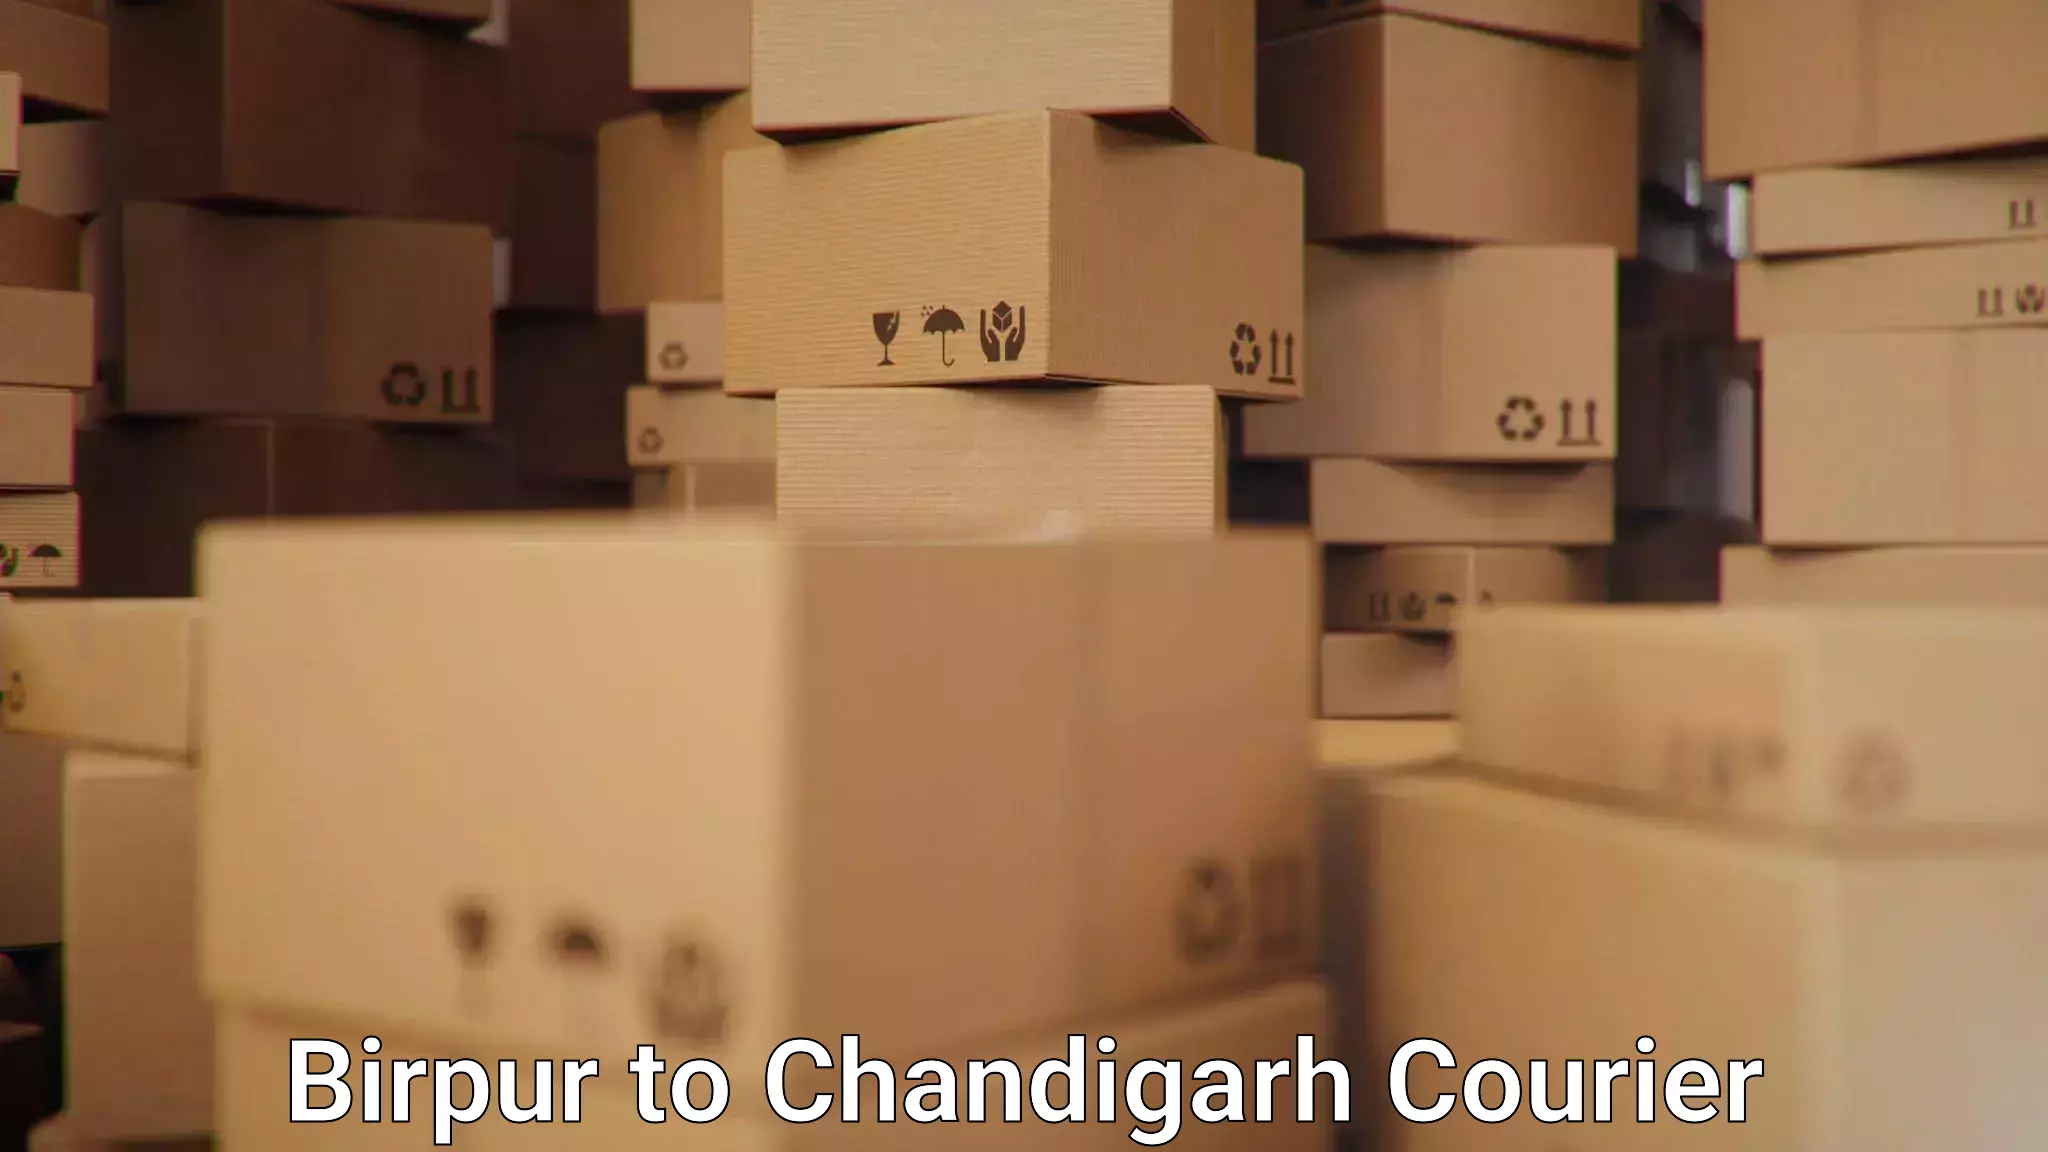 Easy return solutions in Birpur to Chandigarh